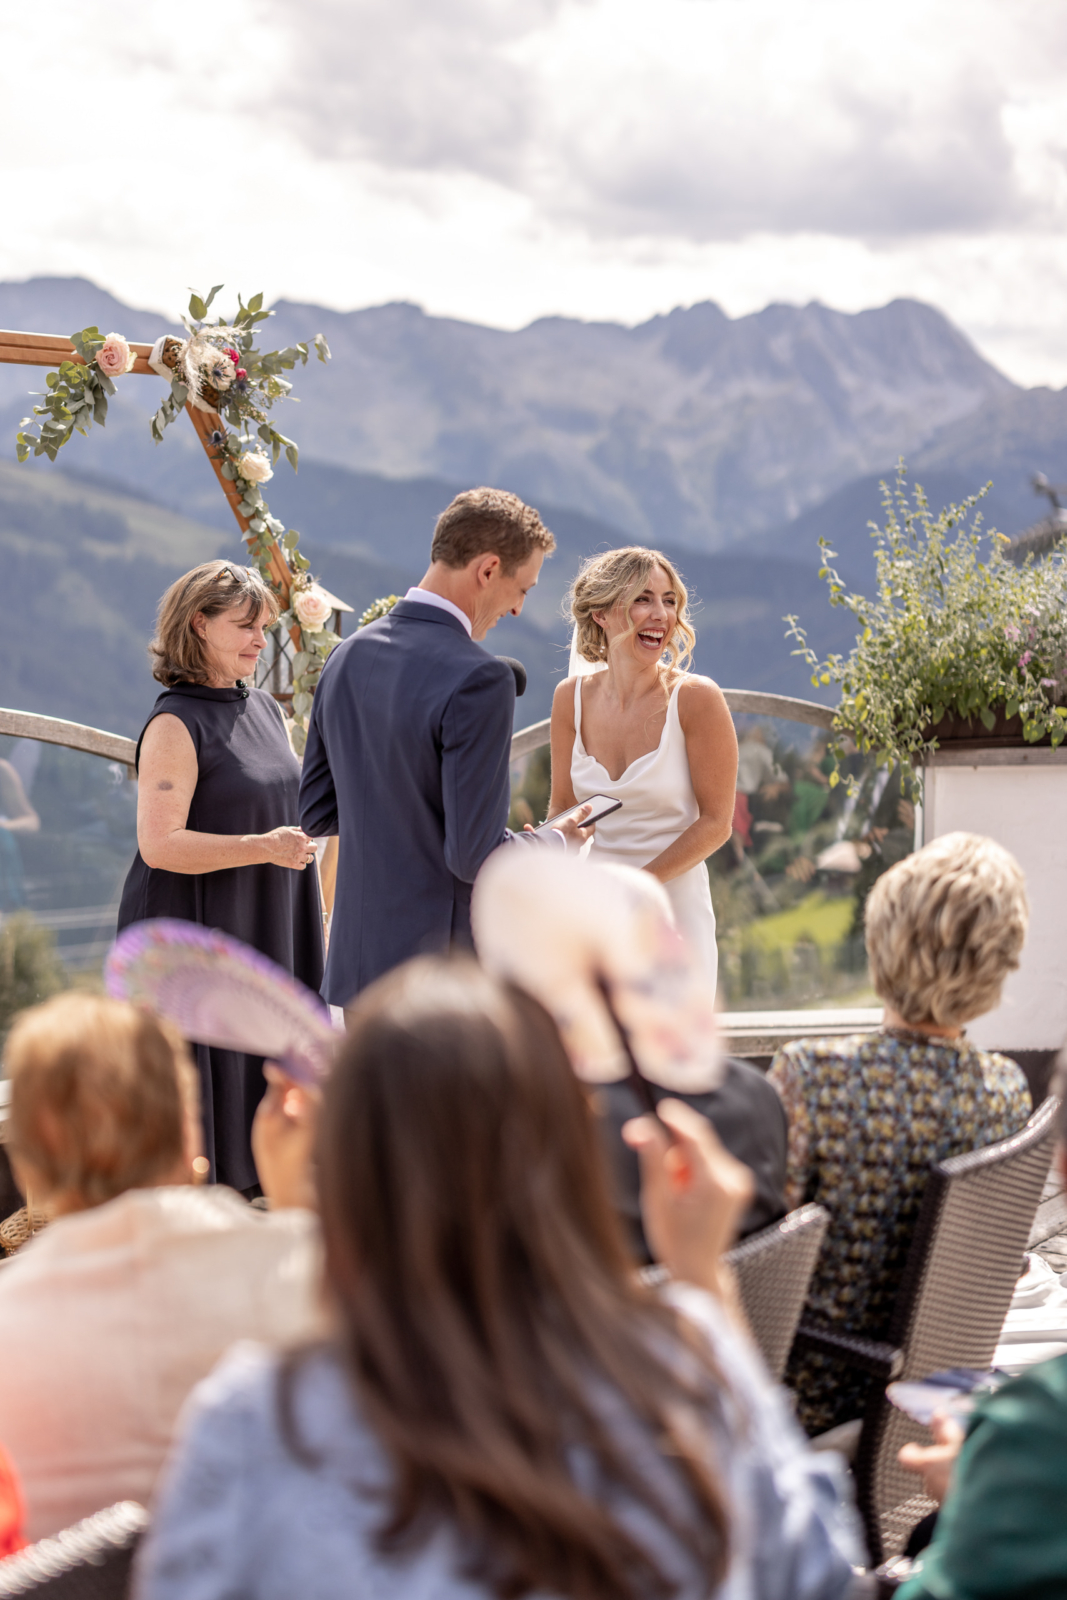 emotional wedding vows in the mountains in Austria